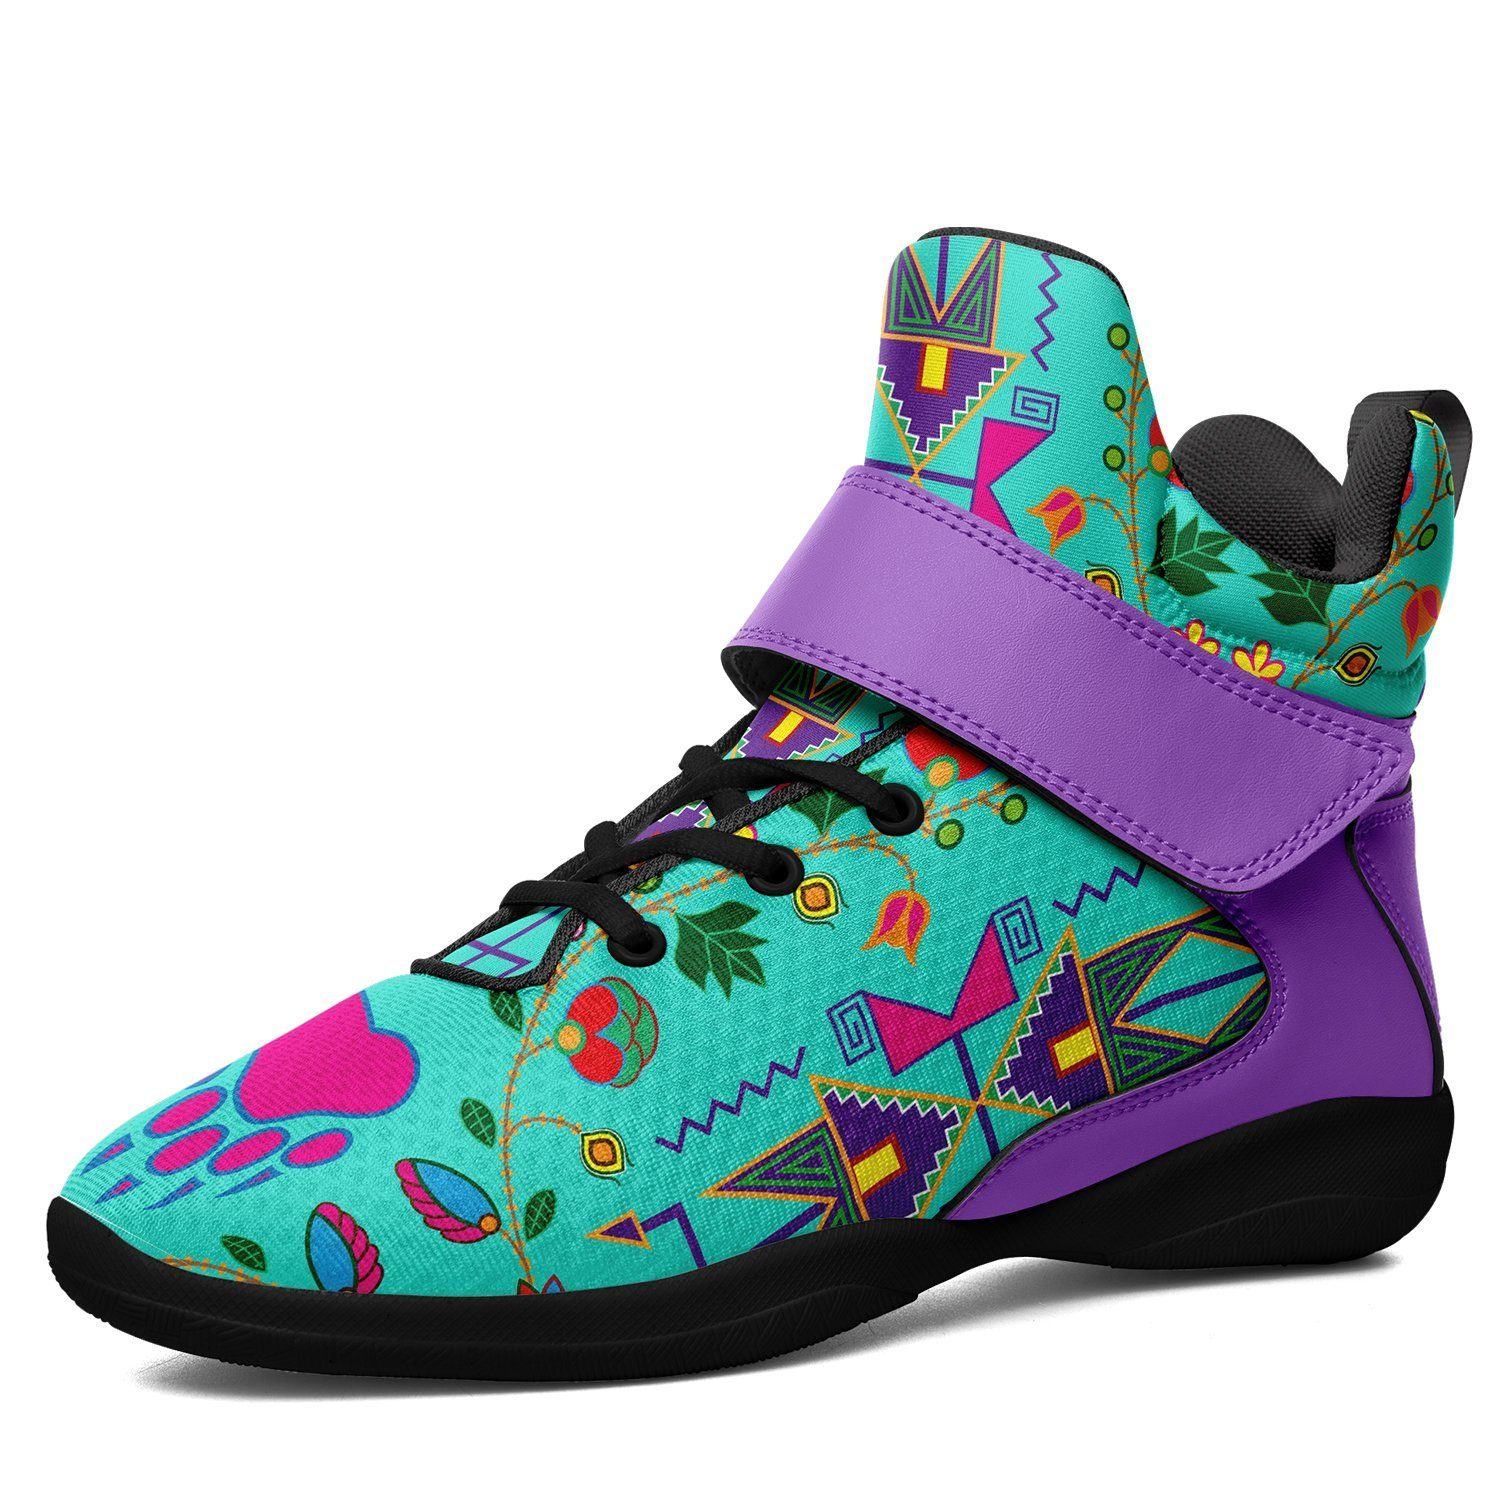 Geometric Floral Fall Sky Ipottaa Basketball / Sport High Top Shoes - Black Sole 49 Dzine US Men 7 / EUR 40 Black Sole with Lavender Strap 